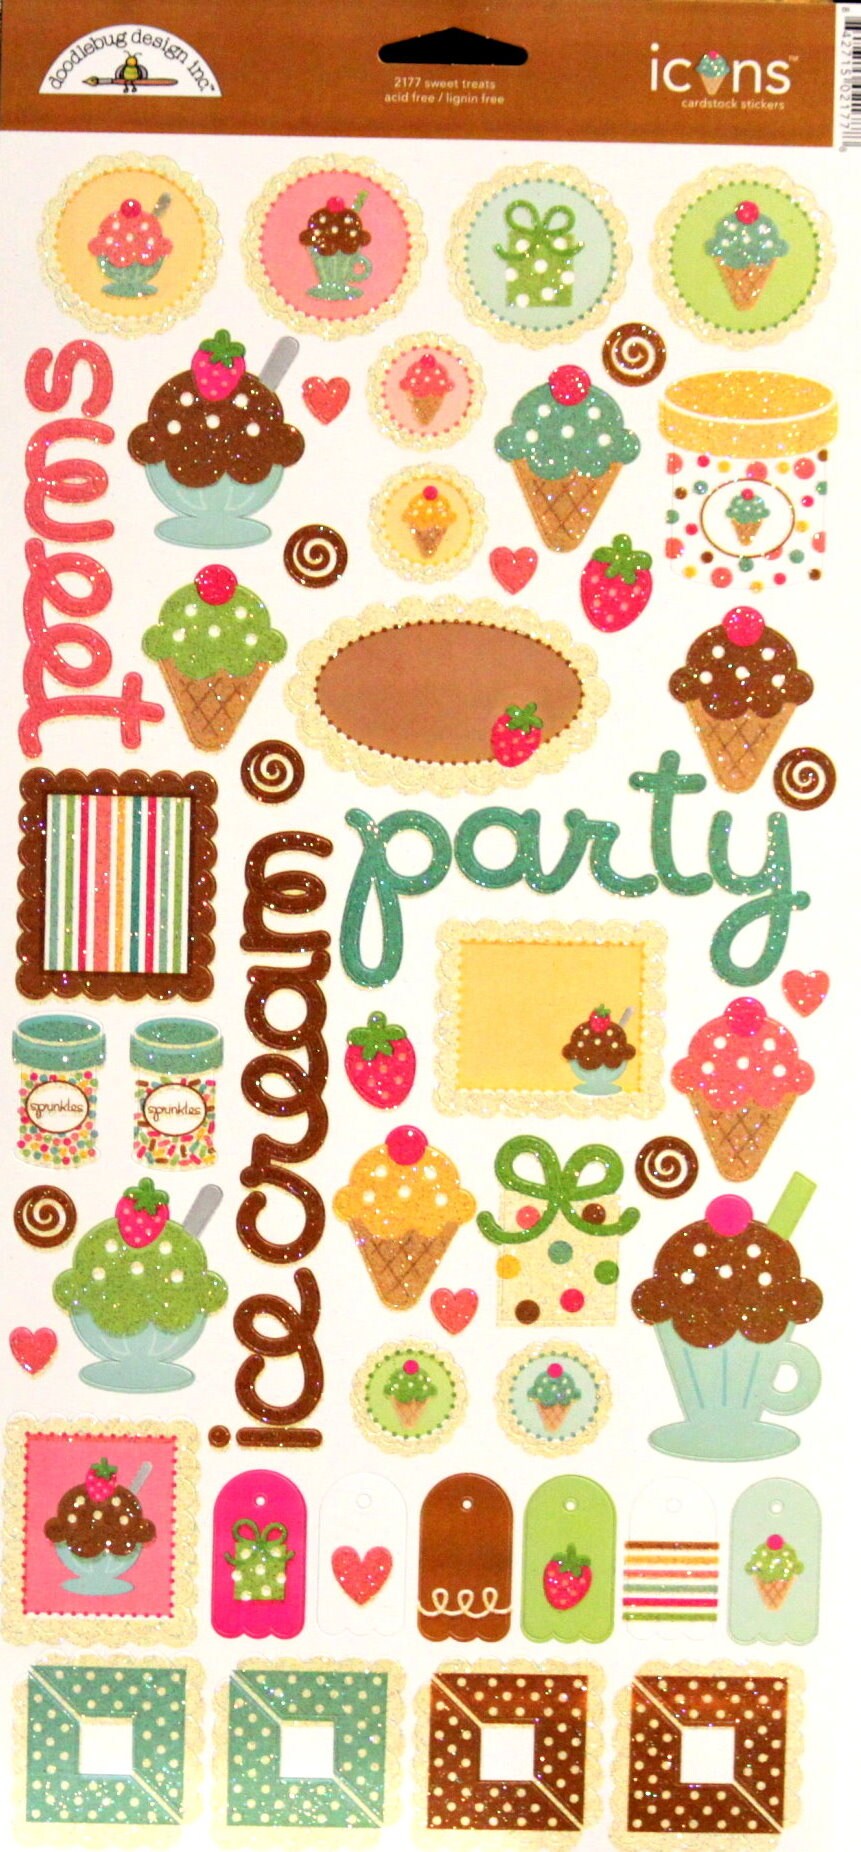 Doodlebug Designs Sweet Treats Glitter Icons Cardstock Stickers